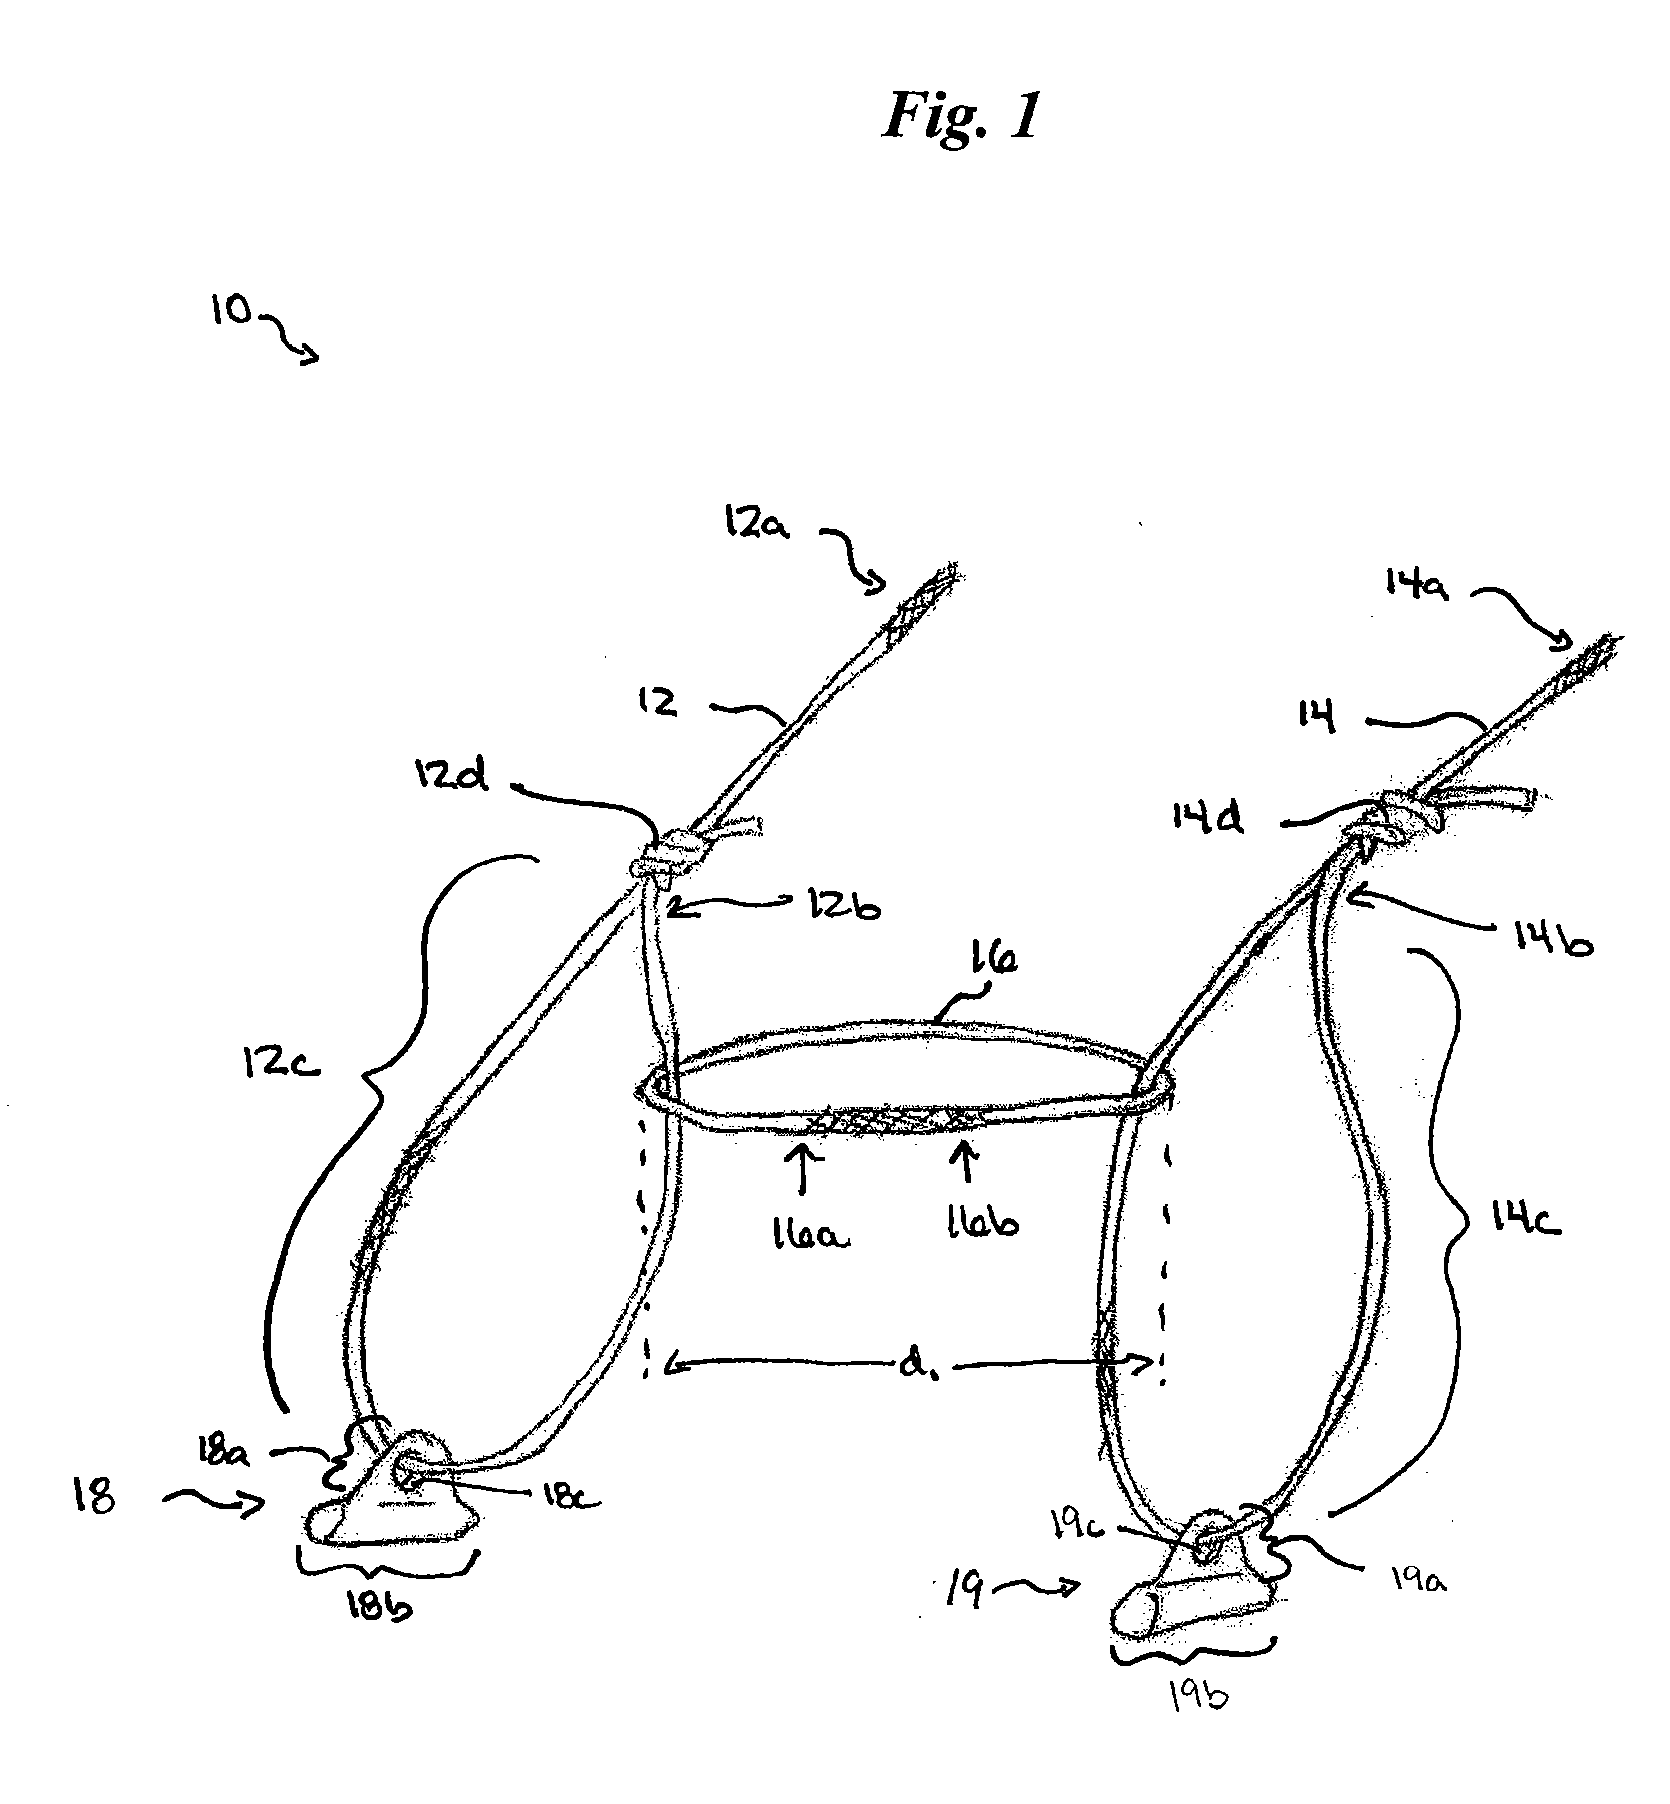 Methods and devices for repairing tissue